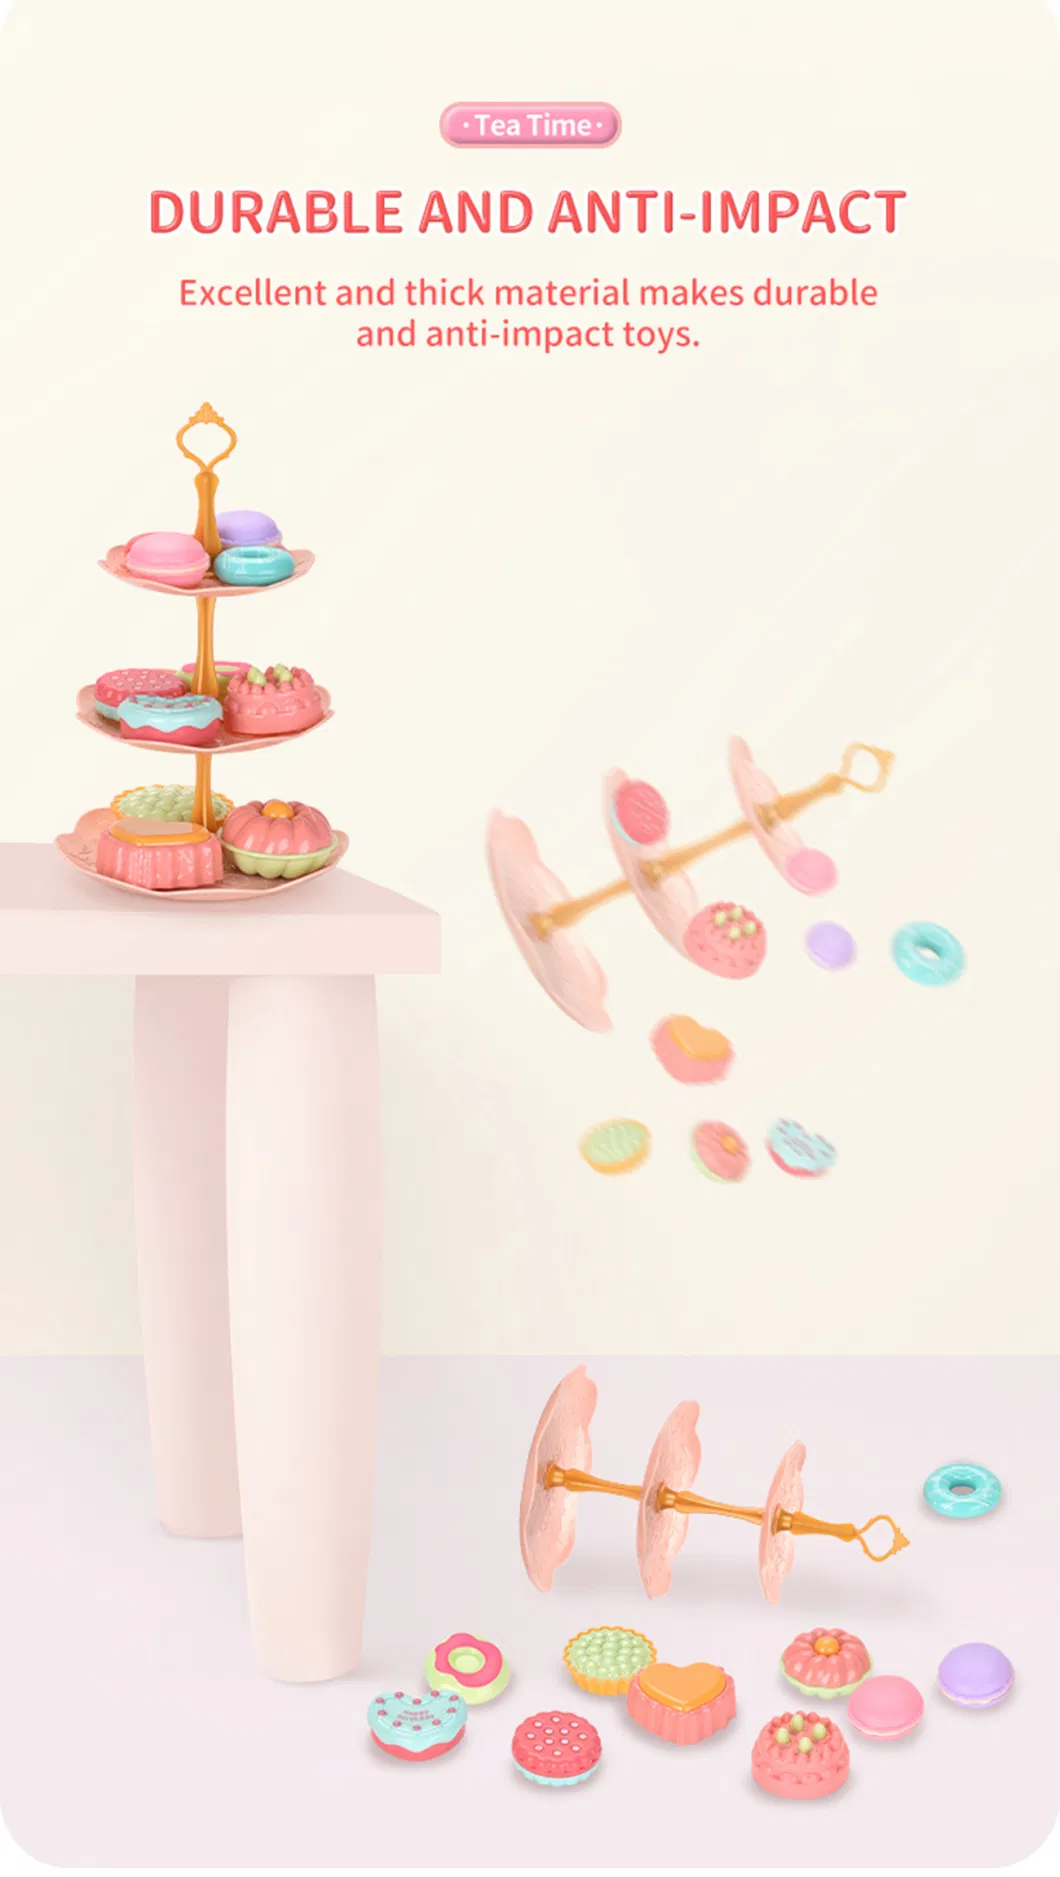 Sy Toys Girl Party Gift Box 3 Layer Dessert Stand Plastic Doughnut Cake Pretend Play Afternoon Tea Set Toy